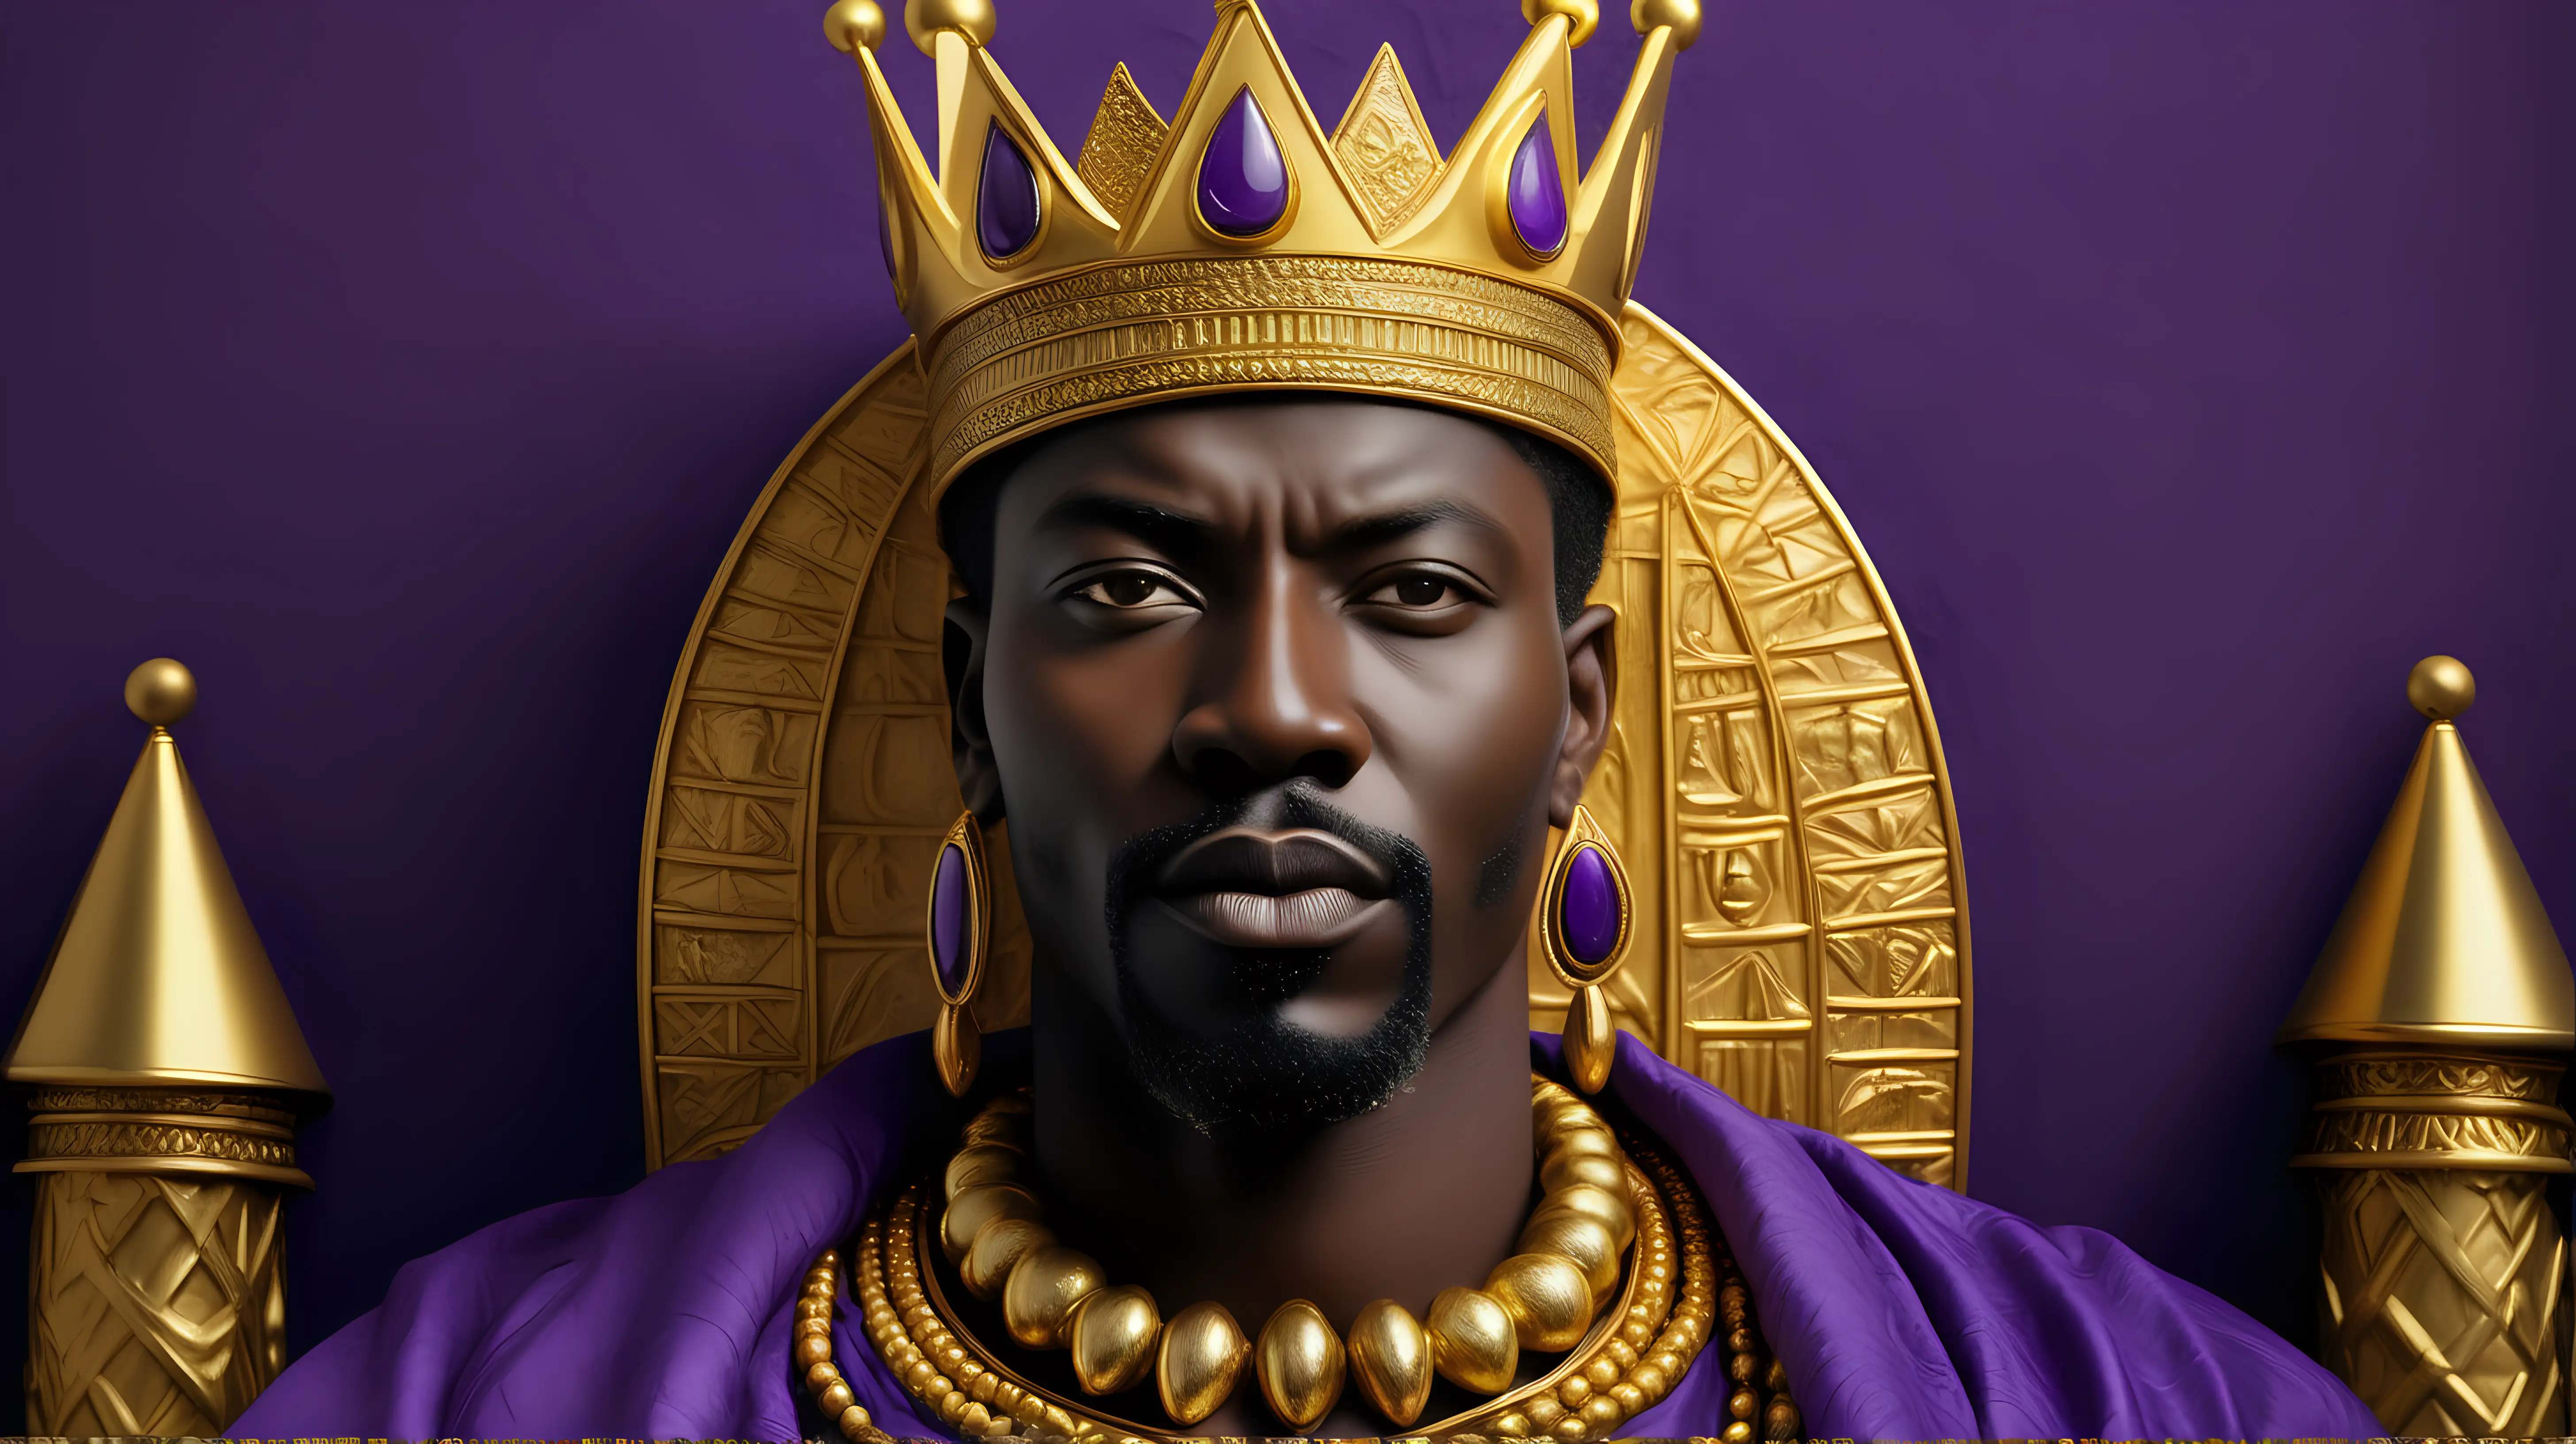 Main Subject: Mansa Musa, the legendary King of Mali.
Camera Position and Angle: Close-up view, with Mansa Musa facing directly towards the camera.
Facial Expression: Regal and composed, conveying authority and confidence. Mansa Musa's eyes should express intensity.
Attire and Accessories: Mansa Musa is adorned with an ornate king's crown. He also wears gold earrings and multiple gold necklaces, emphasizing his wealth and status.
Lighting: Natural, softly highlighting Mansa Musa's facial contours and the intricacies of his jewelry.
Background: Purple and simple, with a high contrast to Mansa Musa's figure, devoid of many distracting elements.
Image Format: 16:9 ratio, ideal for wide-screen display.